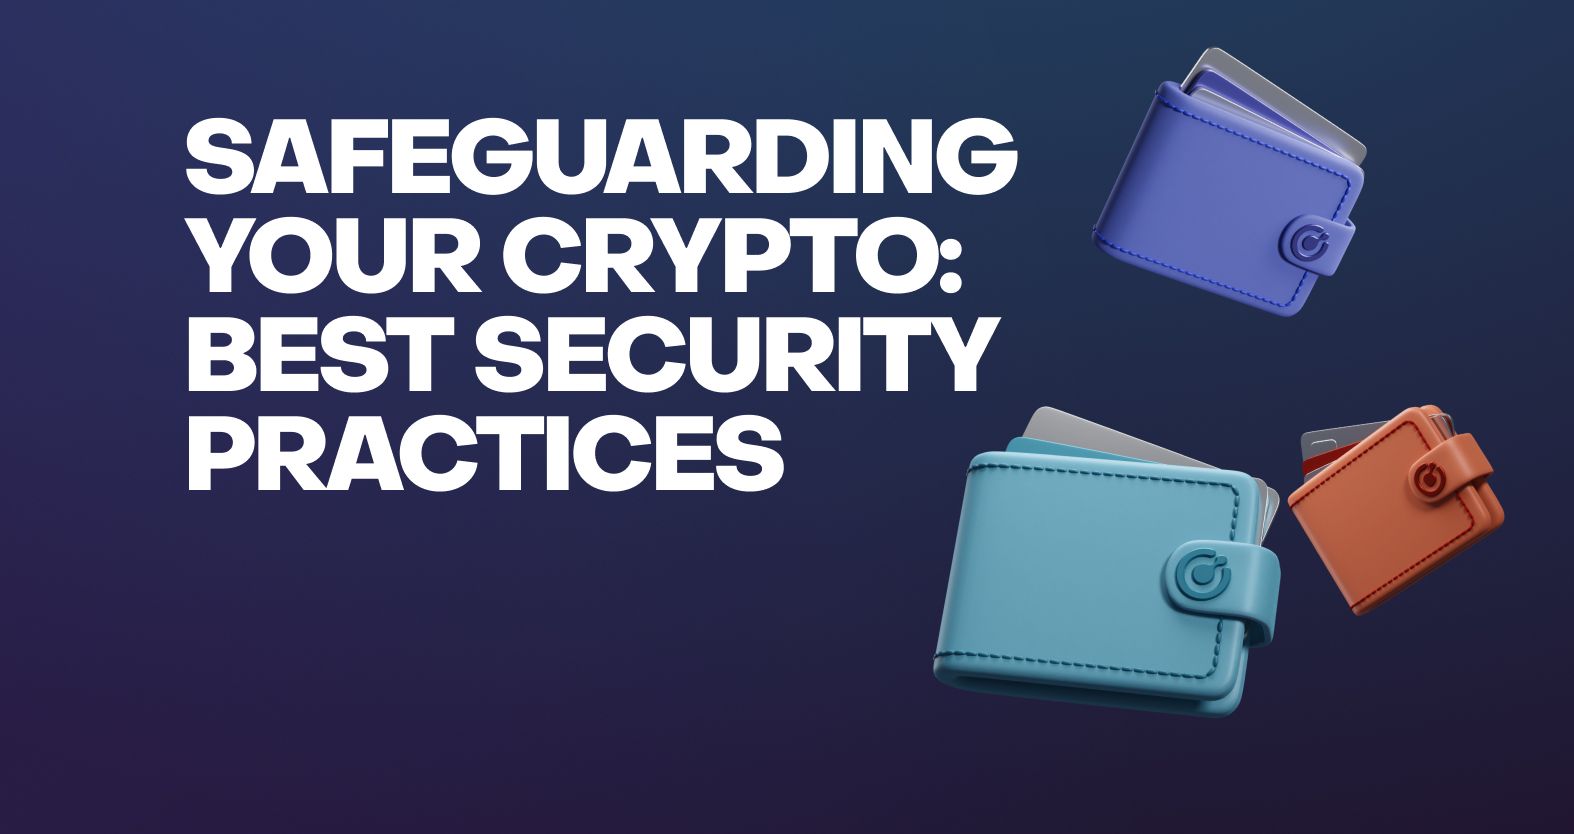 Safeguarding Your Crypto: Best Practices for Security